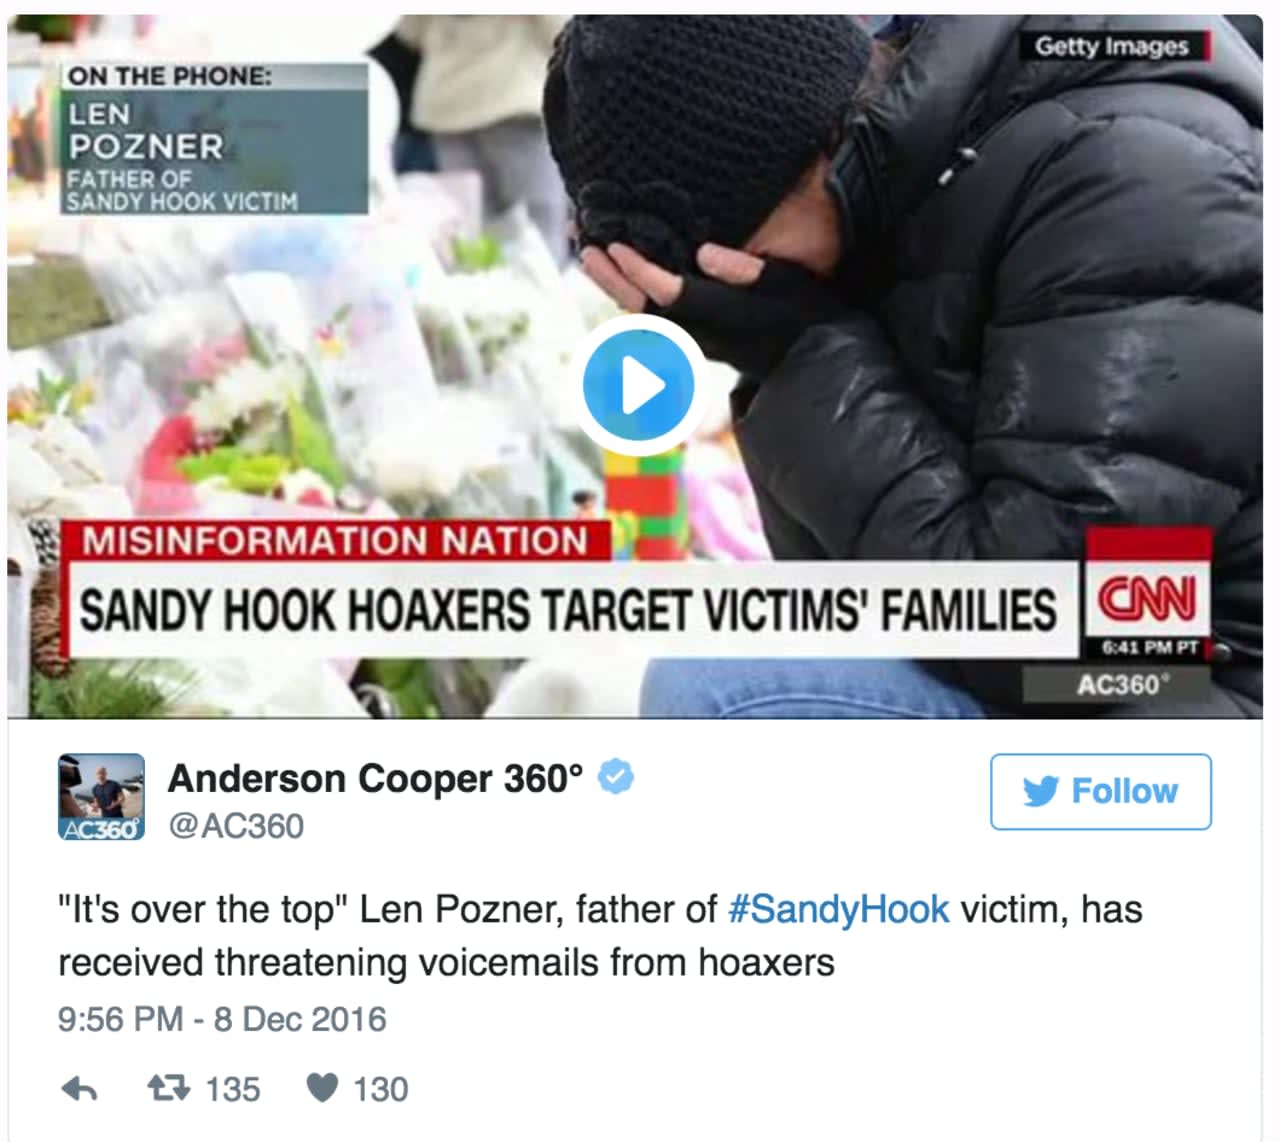 CNN's Anderson Cooper interviewed Len Pozner, the father of a Sandy Hook victim, about death threats he has received.